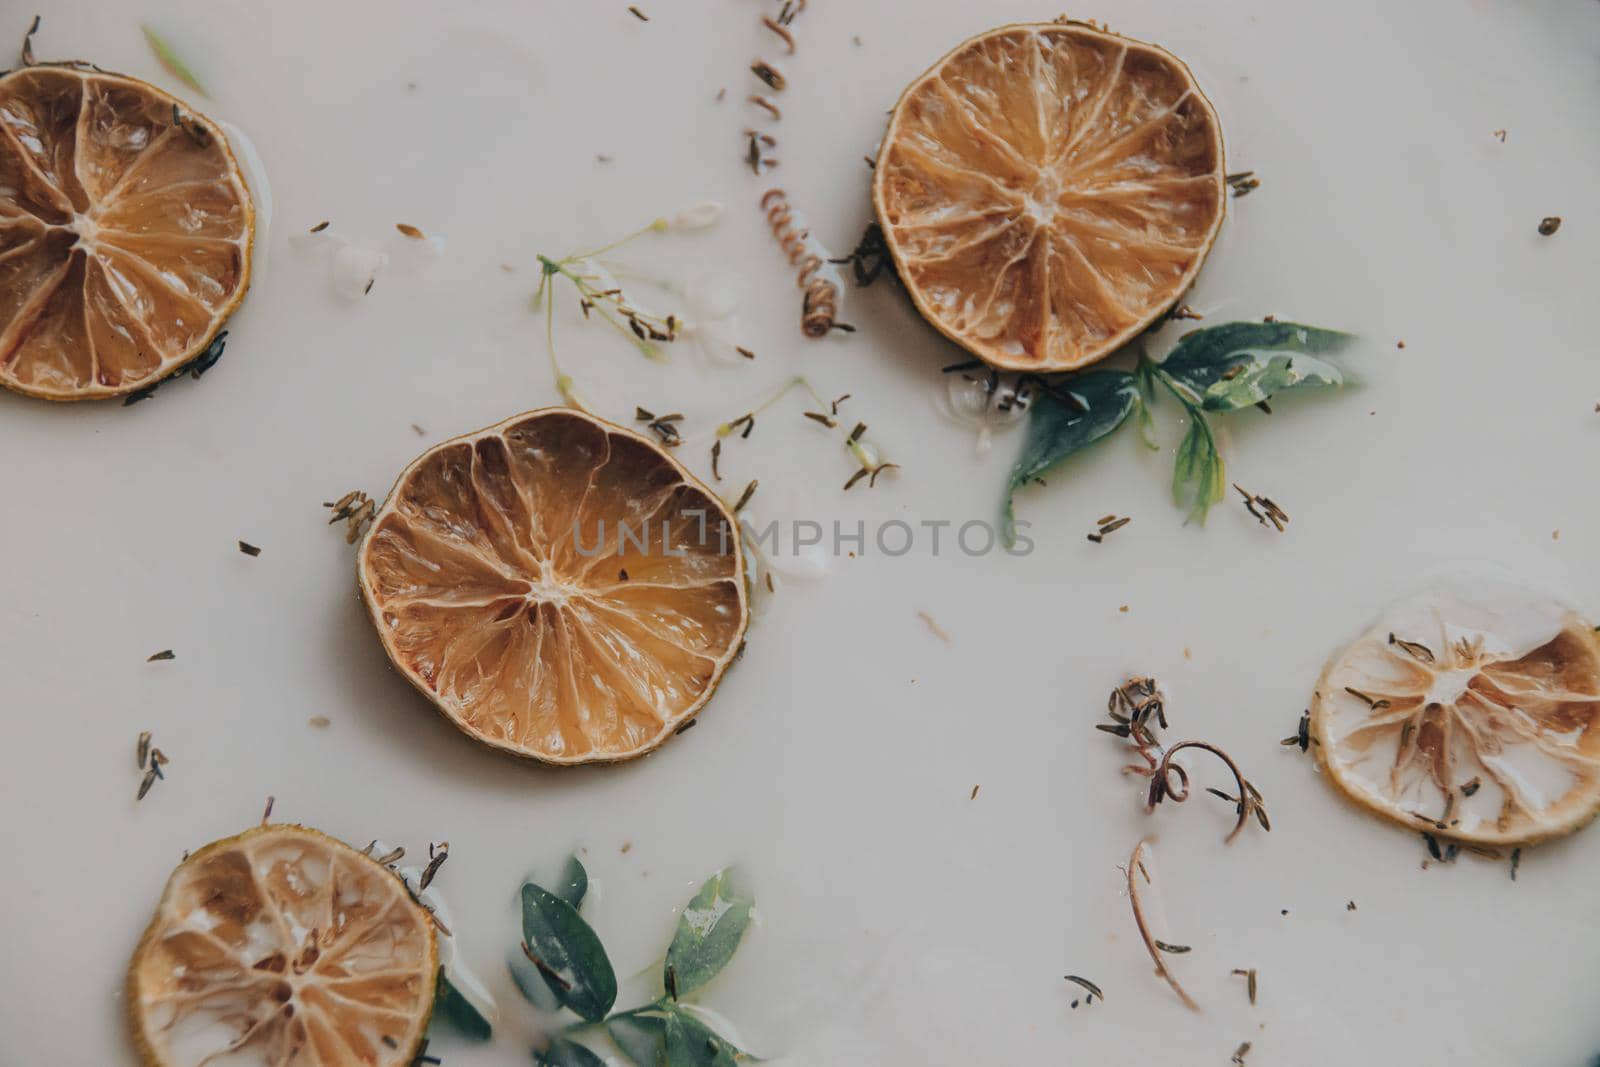 Close up of a therapeutic milk bath filled with dried lemon slices and other herbs for spa, beauty and wellness